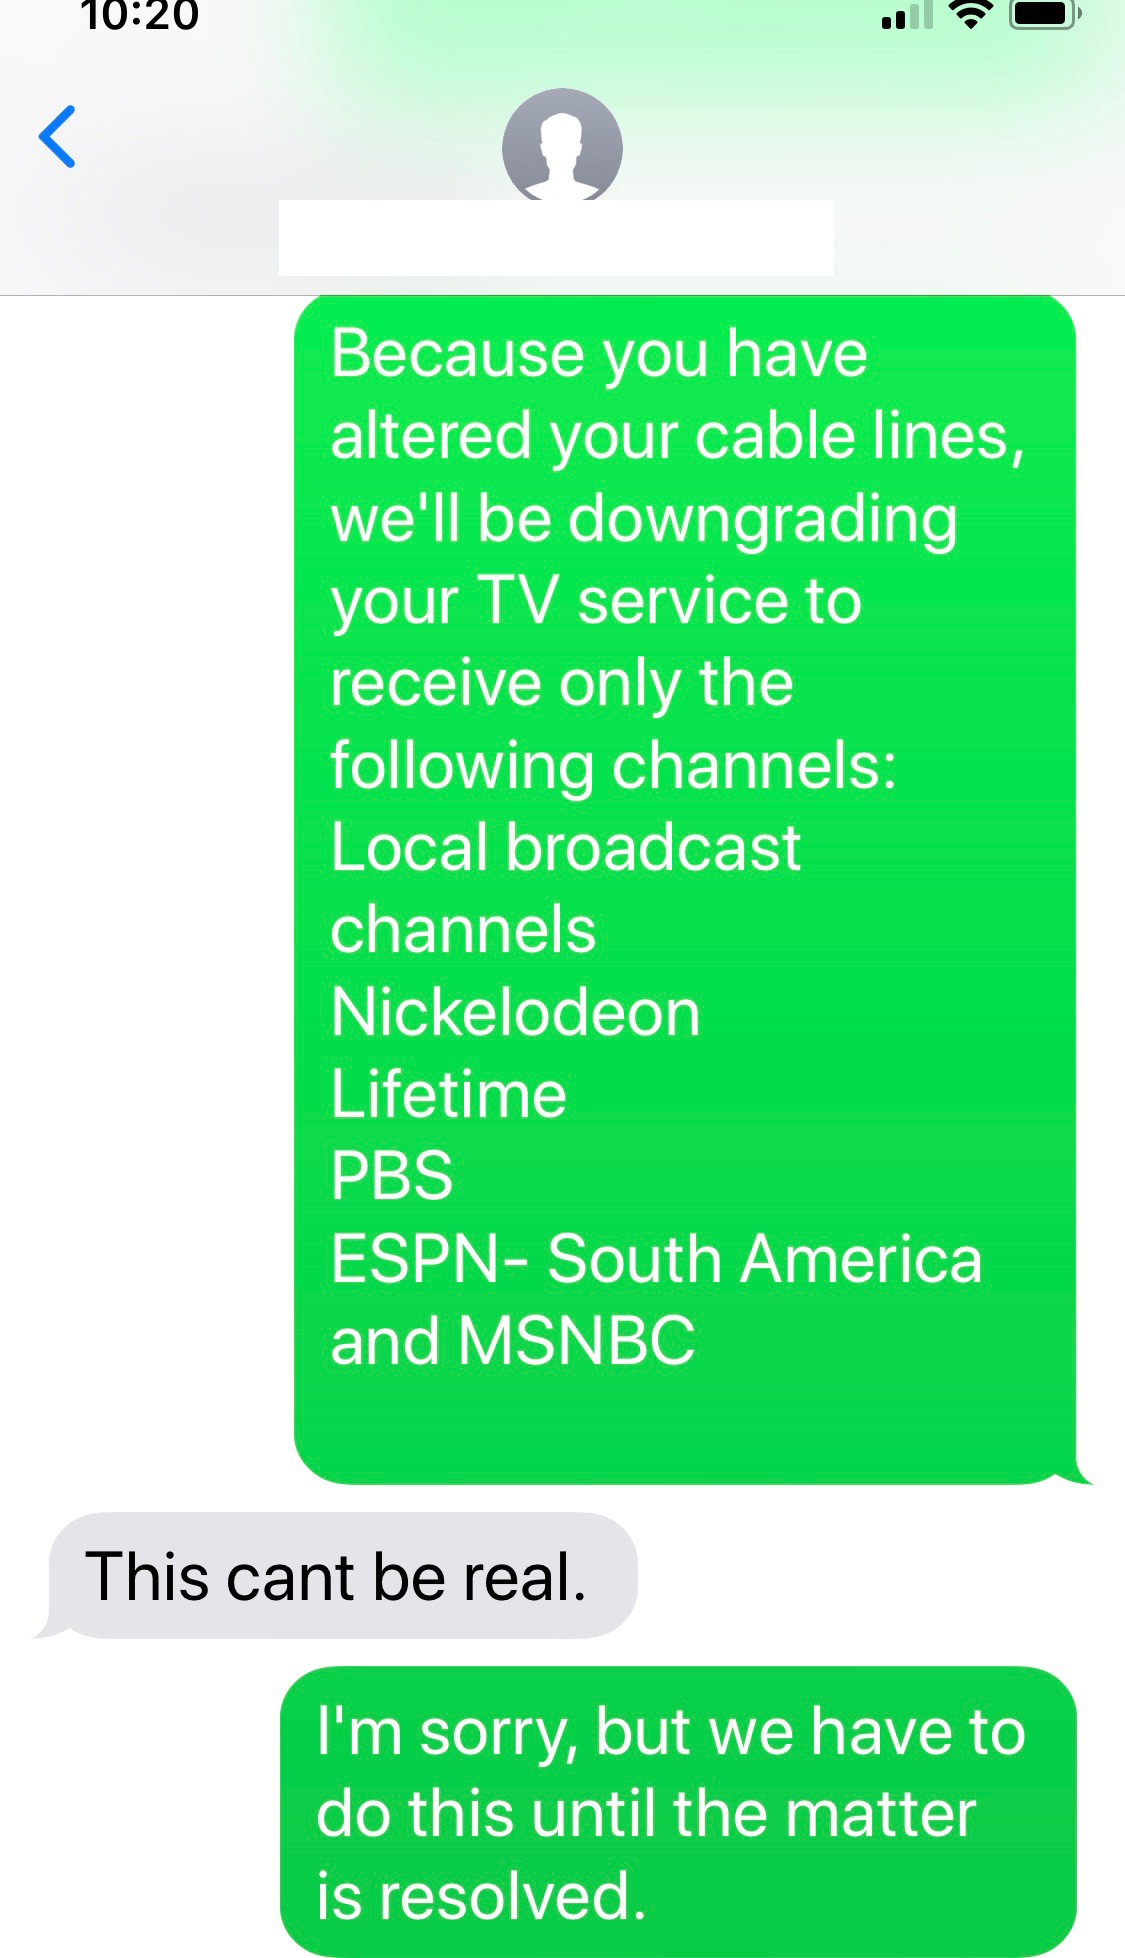 wrong number text - number - Because you have altered your cable lines, we'll be downgrading your Tv service to receive only the ing channels Local broadcast channels Nickelodeon Lifetime Pbs Espn South America and Msnbc This cant be real. I'm sorry, but 